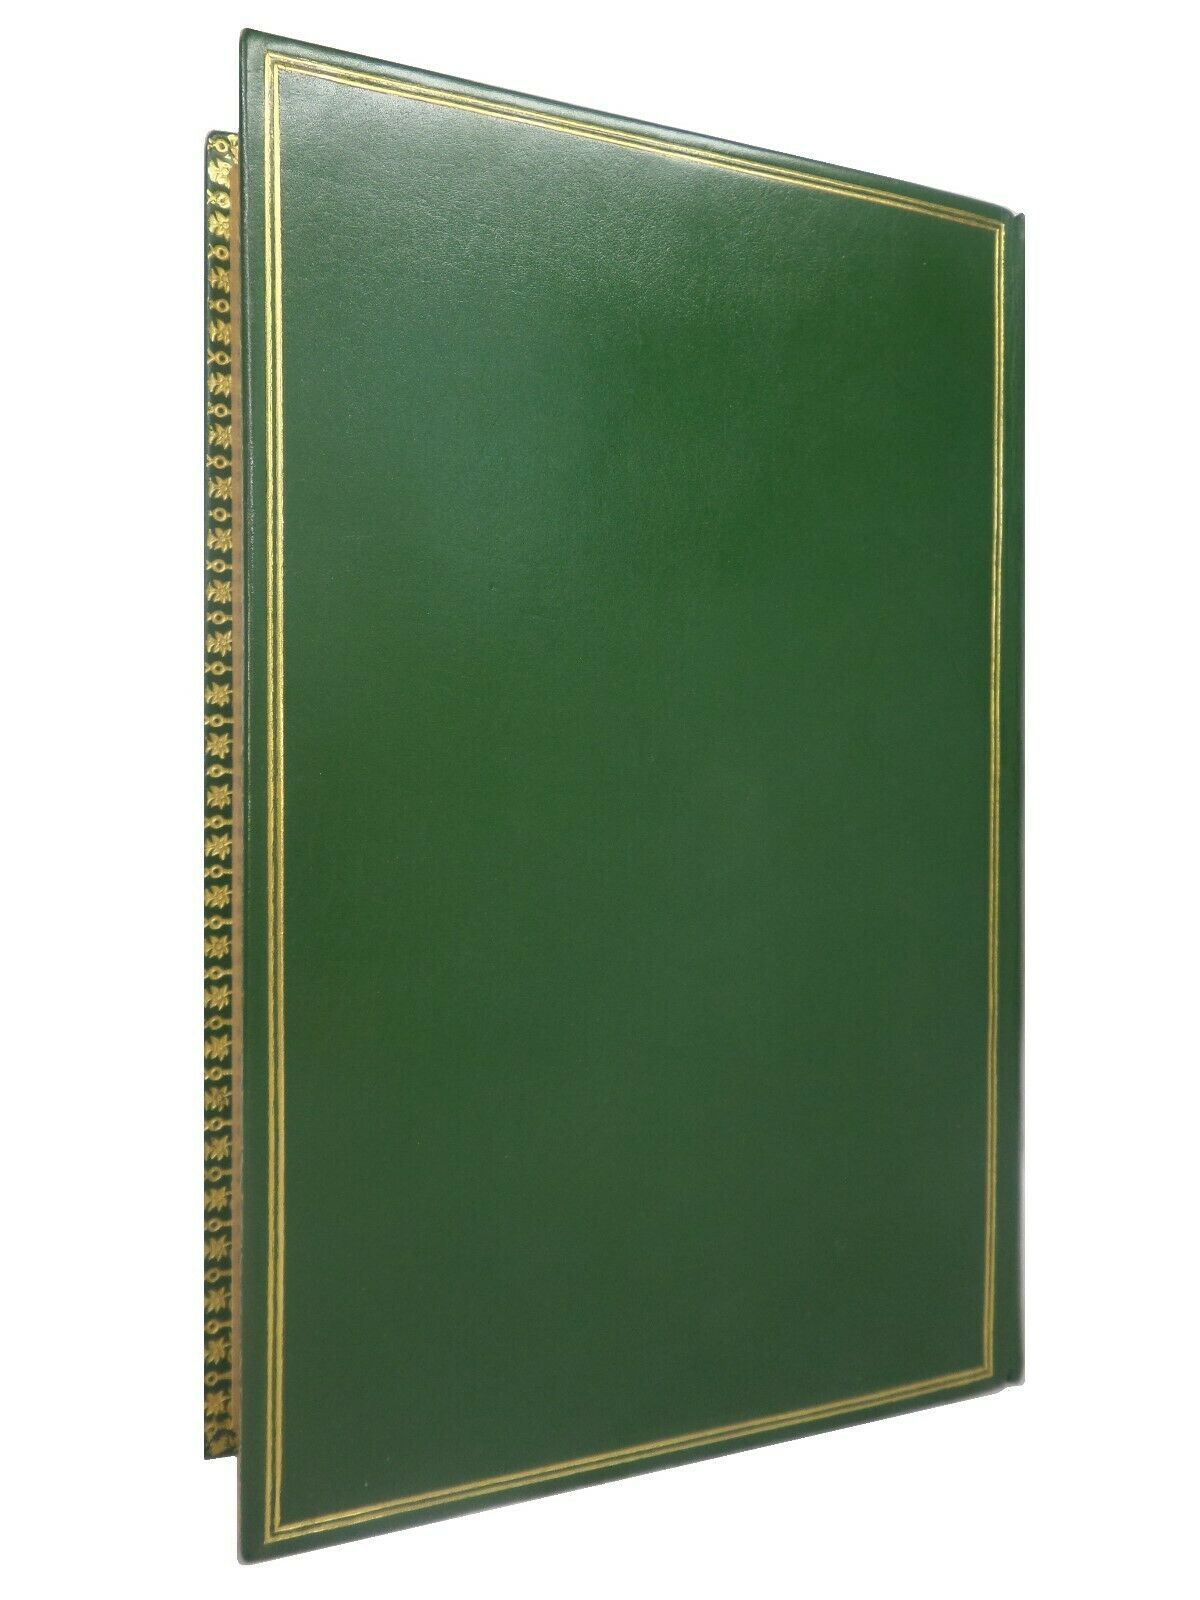 THE WIND IN THE WILLOWS BY KENNETH GRAHAME, ERNEST H. SHEPARD, BAYNTUN-RIVIERE BINDING